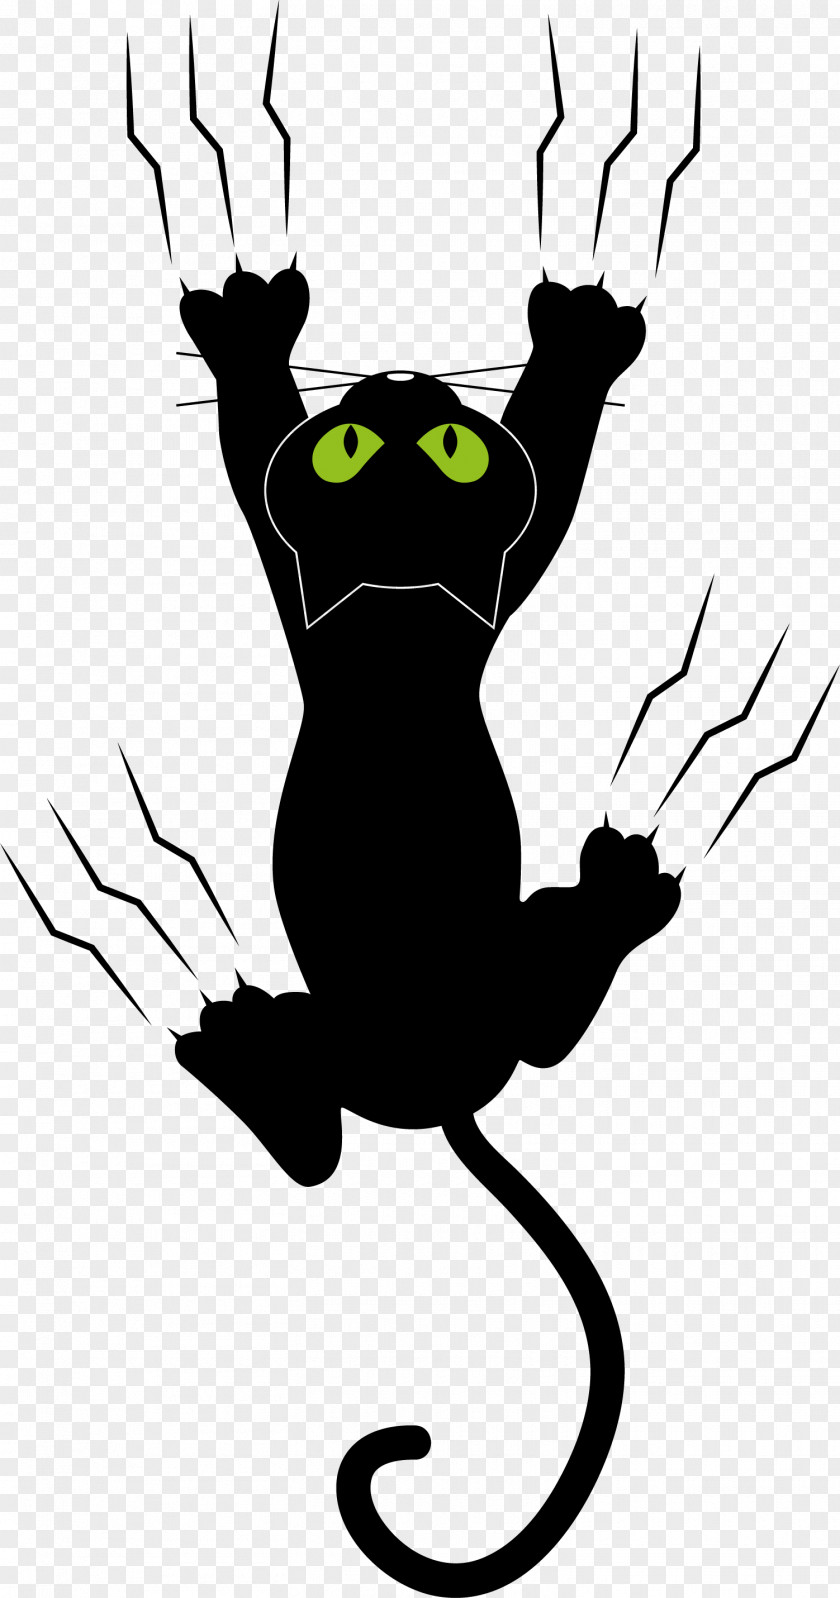 The Black Cat's Claw Marks Cat Kitten Dog Paw PNG